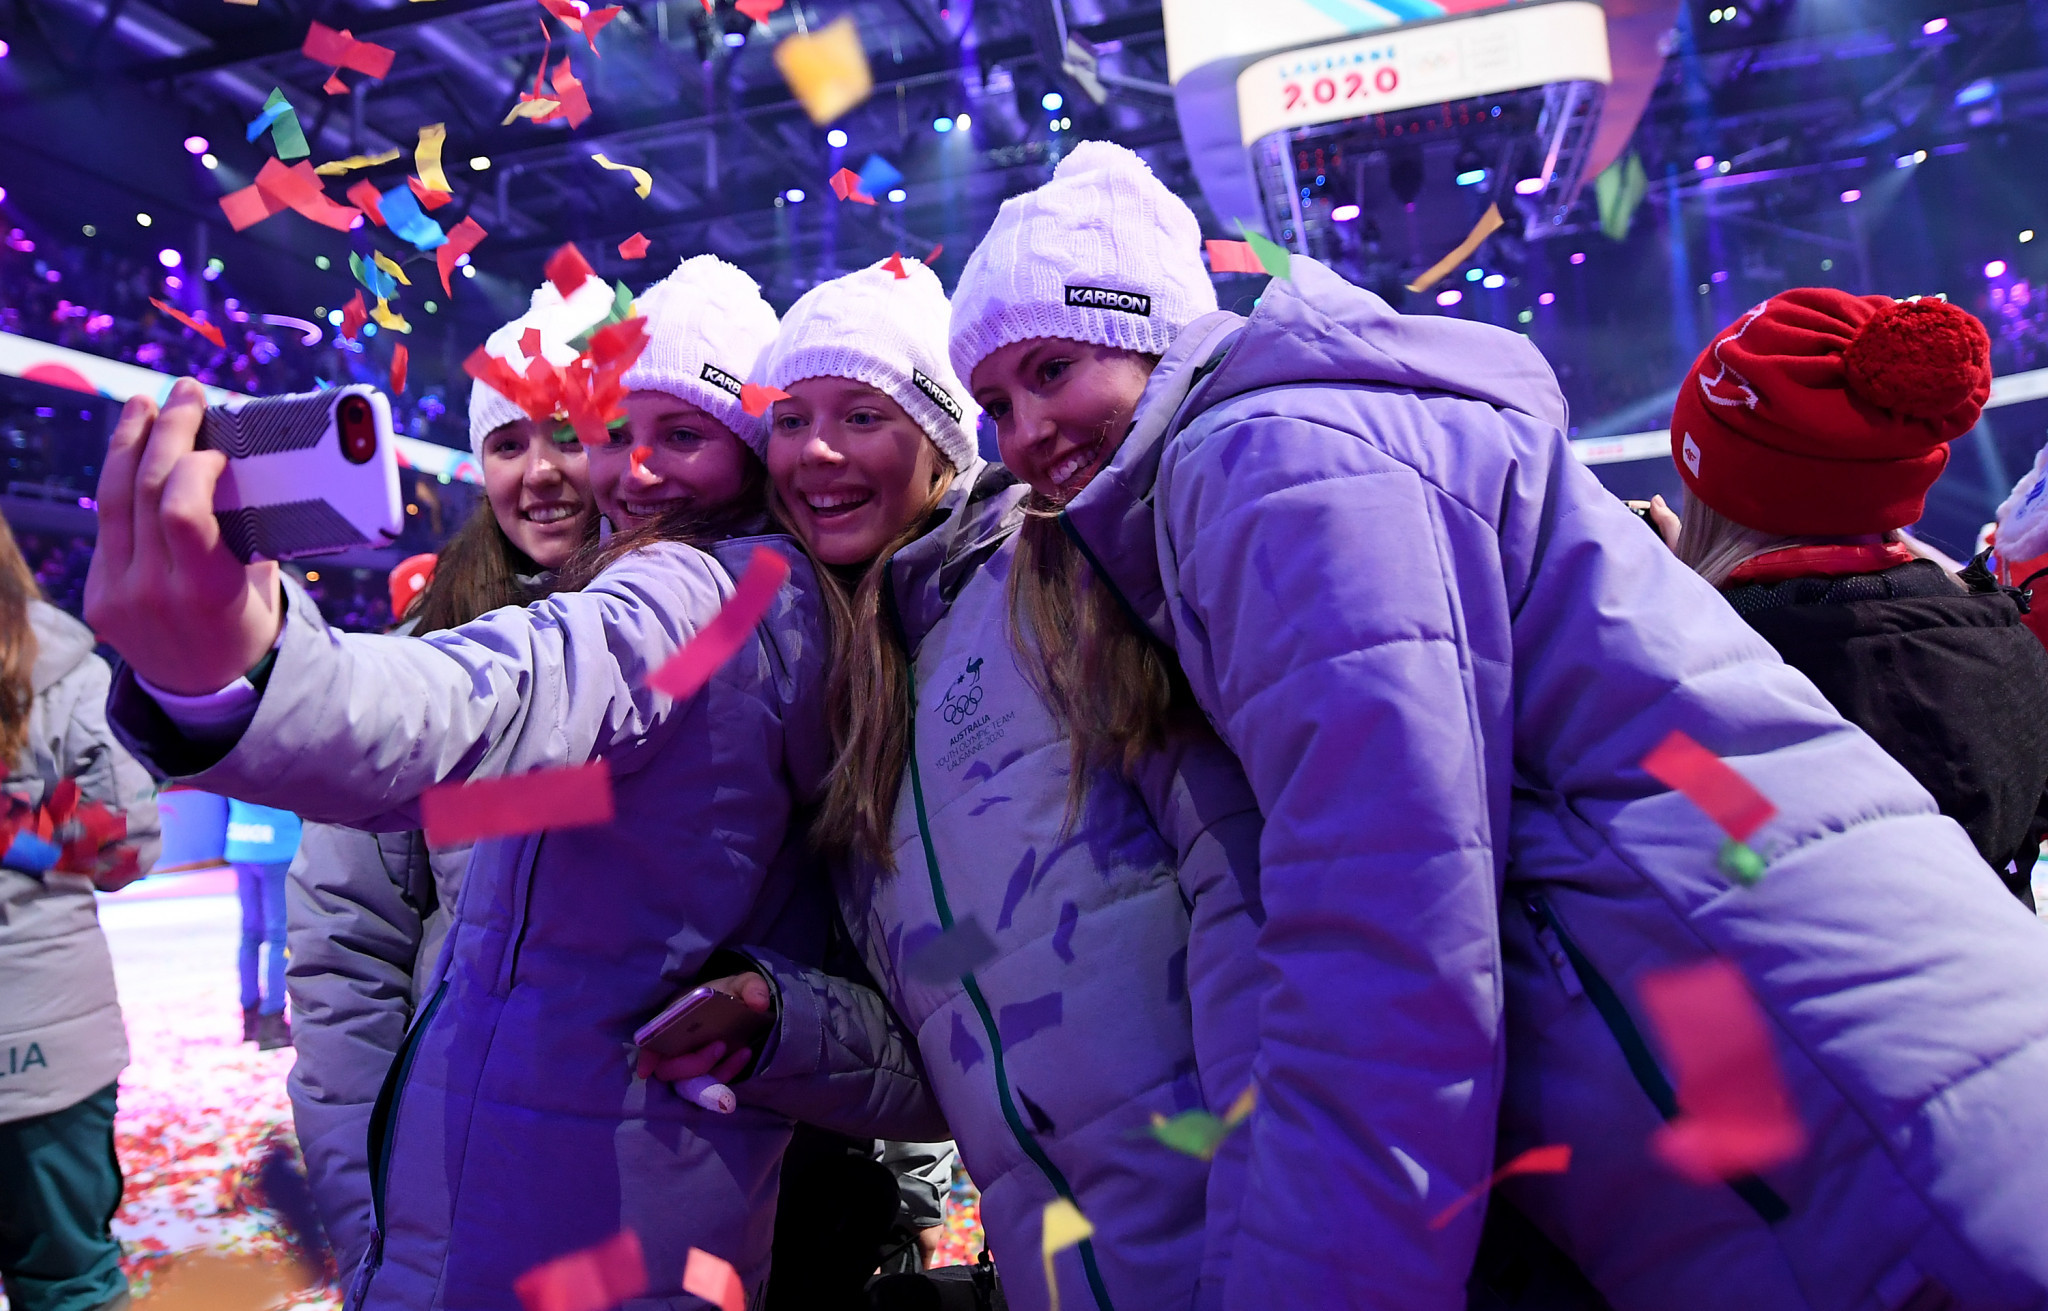 Athletes celebrate start of Winter Youth Olympic Games at Lausanne 2020 Opening Ceremony